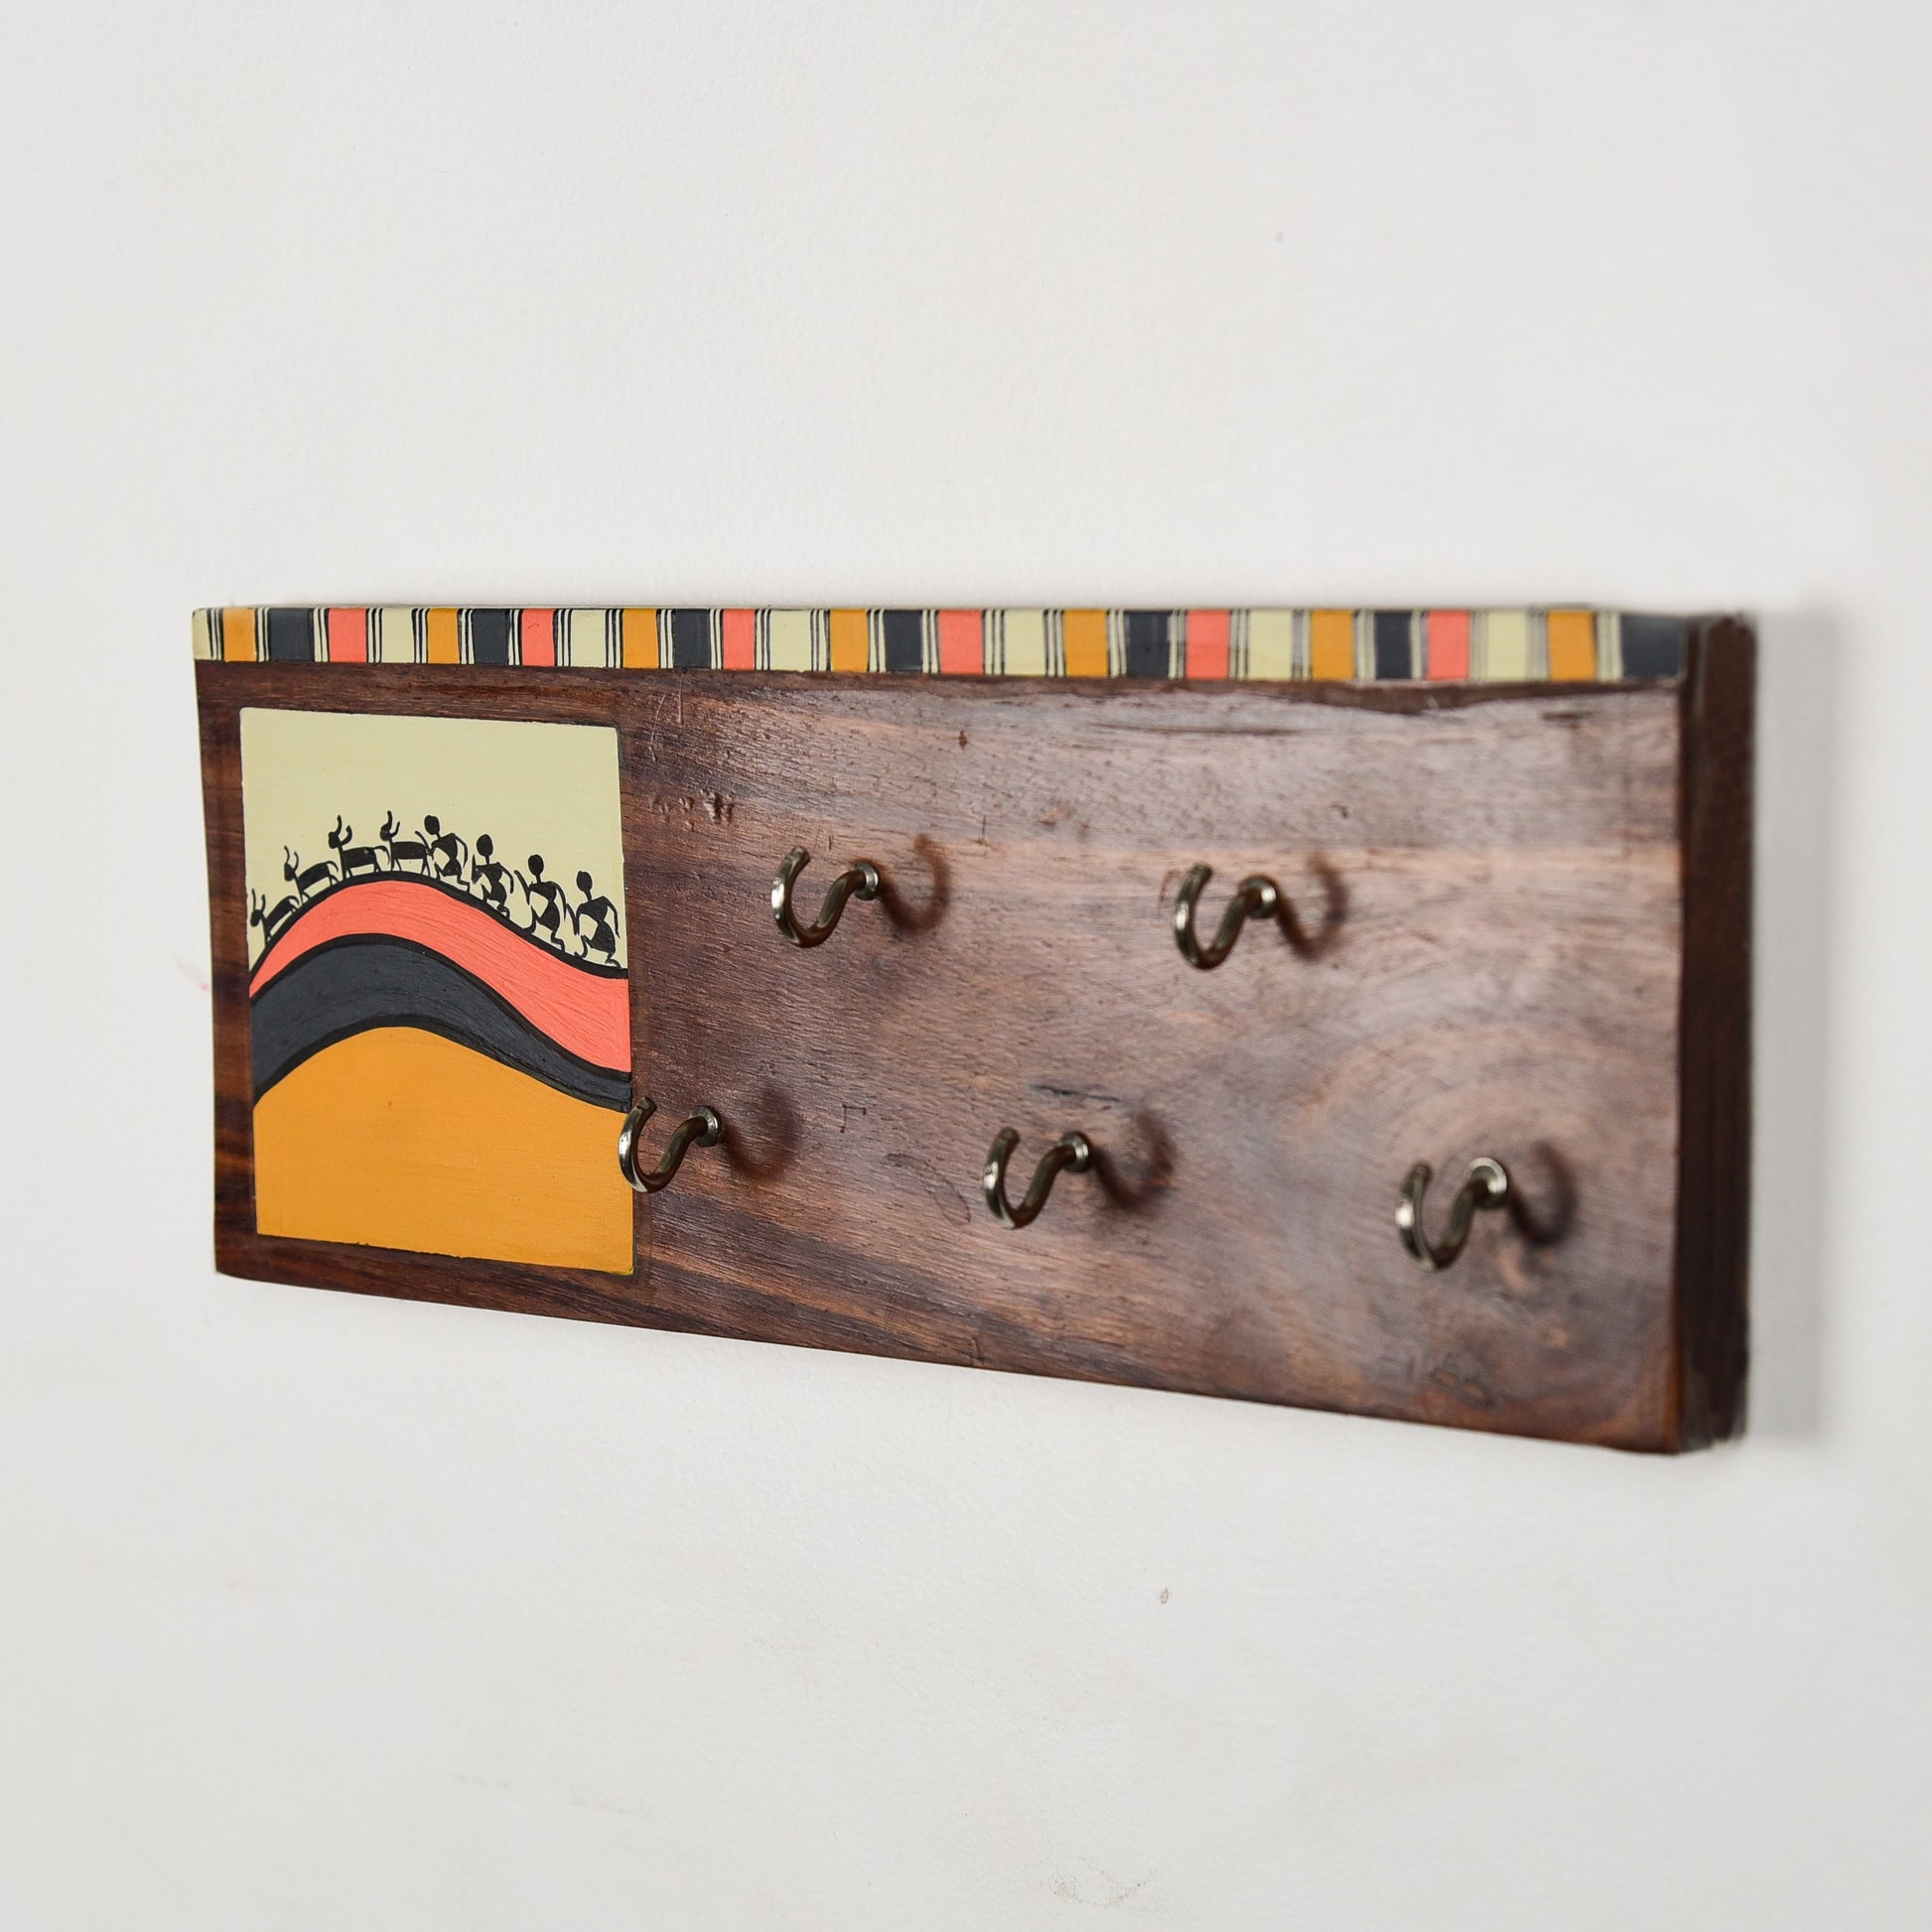 'Warli' Handcrafted Wooden Key Holder For Home Décor